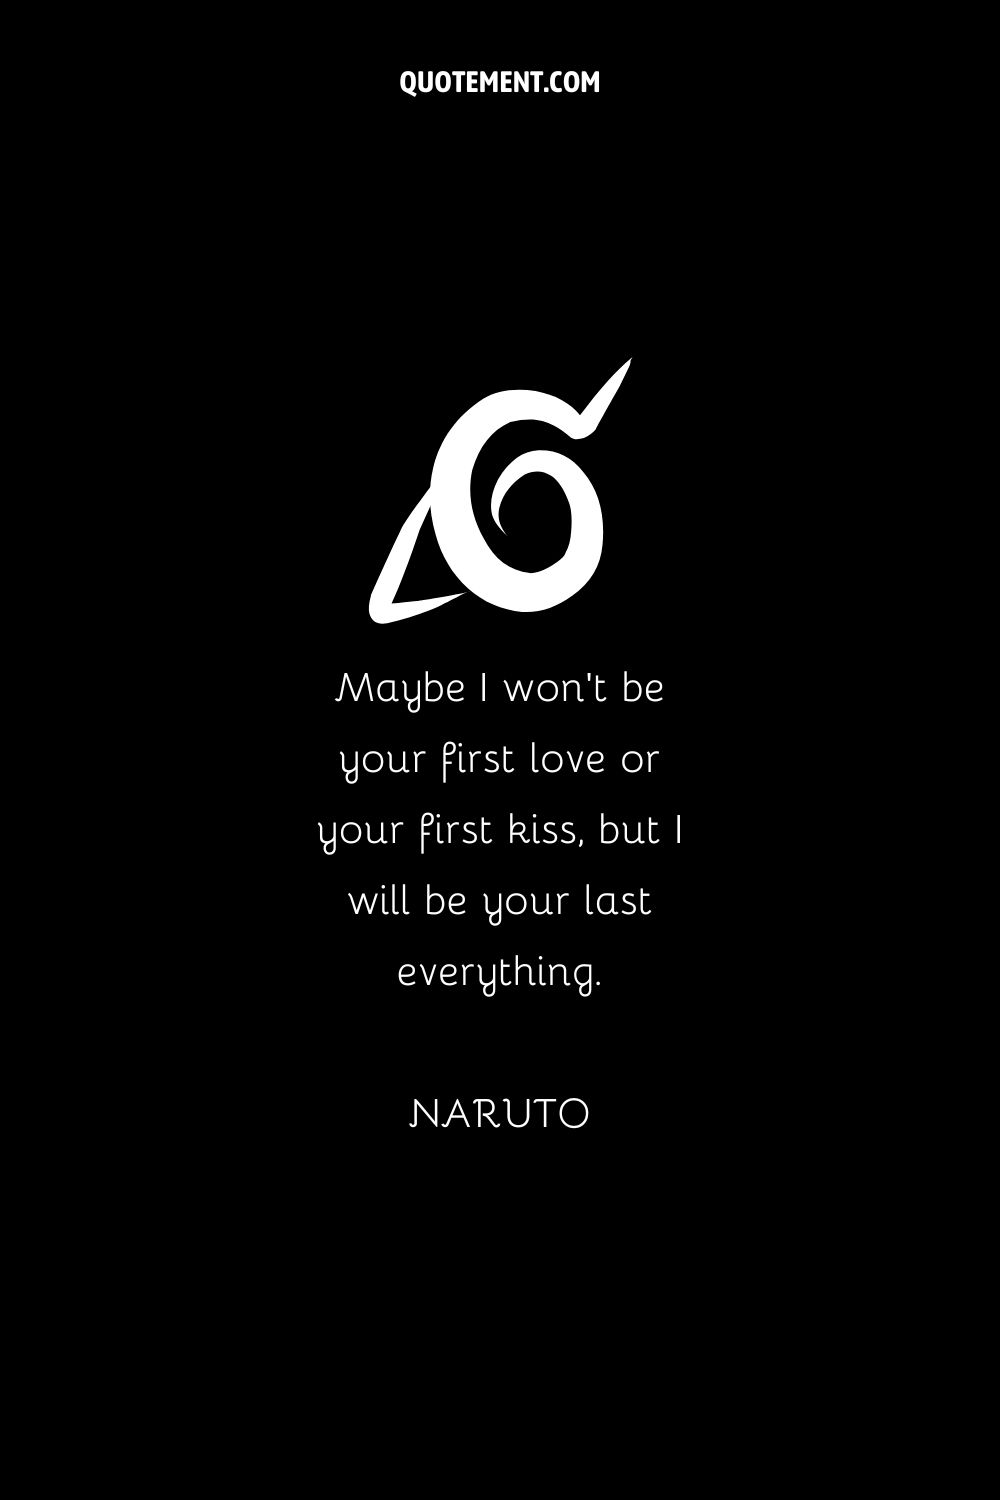 “Maybe I won’t be your first love or your first kiss, but I will be your last everything.” — Naruto